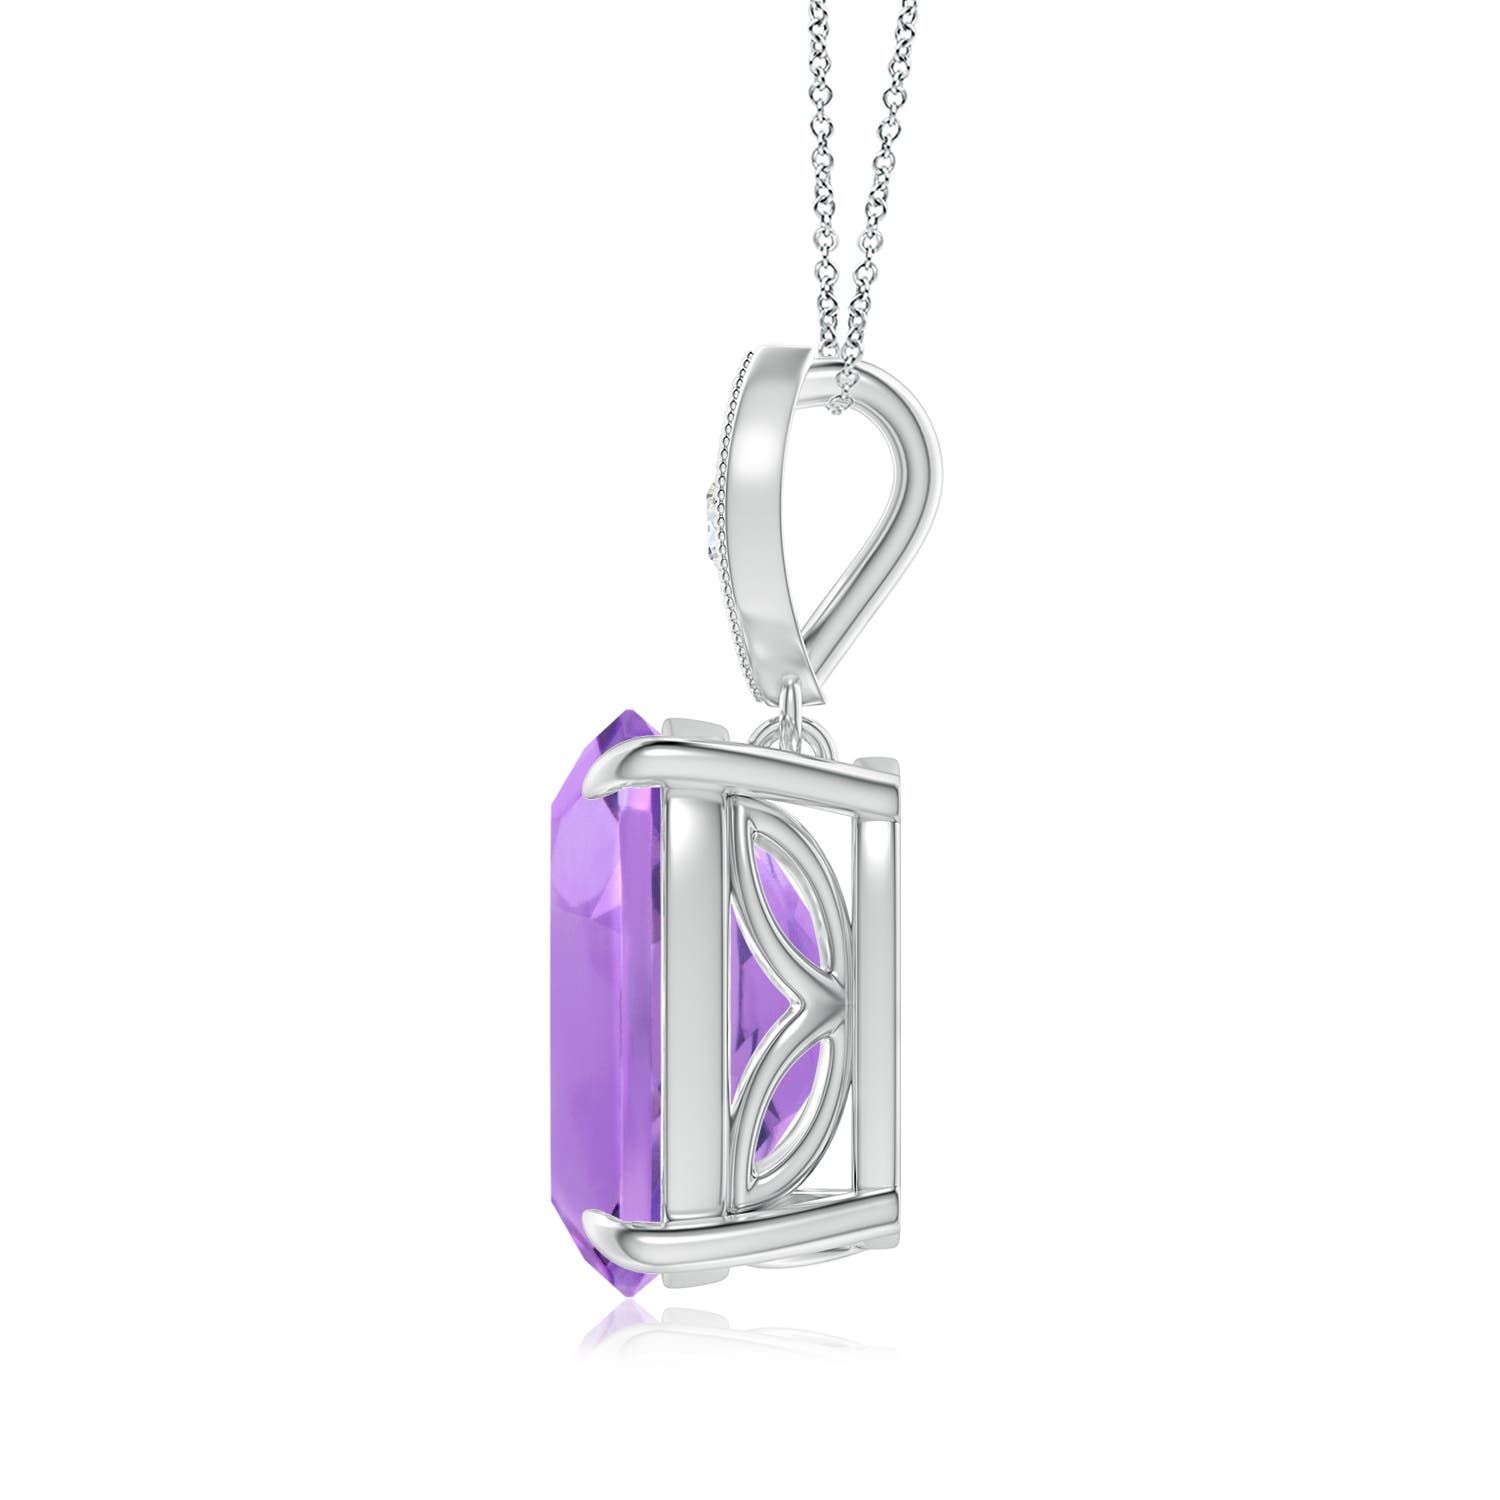 A - Amethyst / 3.57 CT / 14 KT White Gold